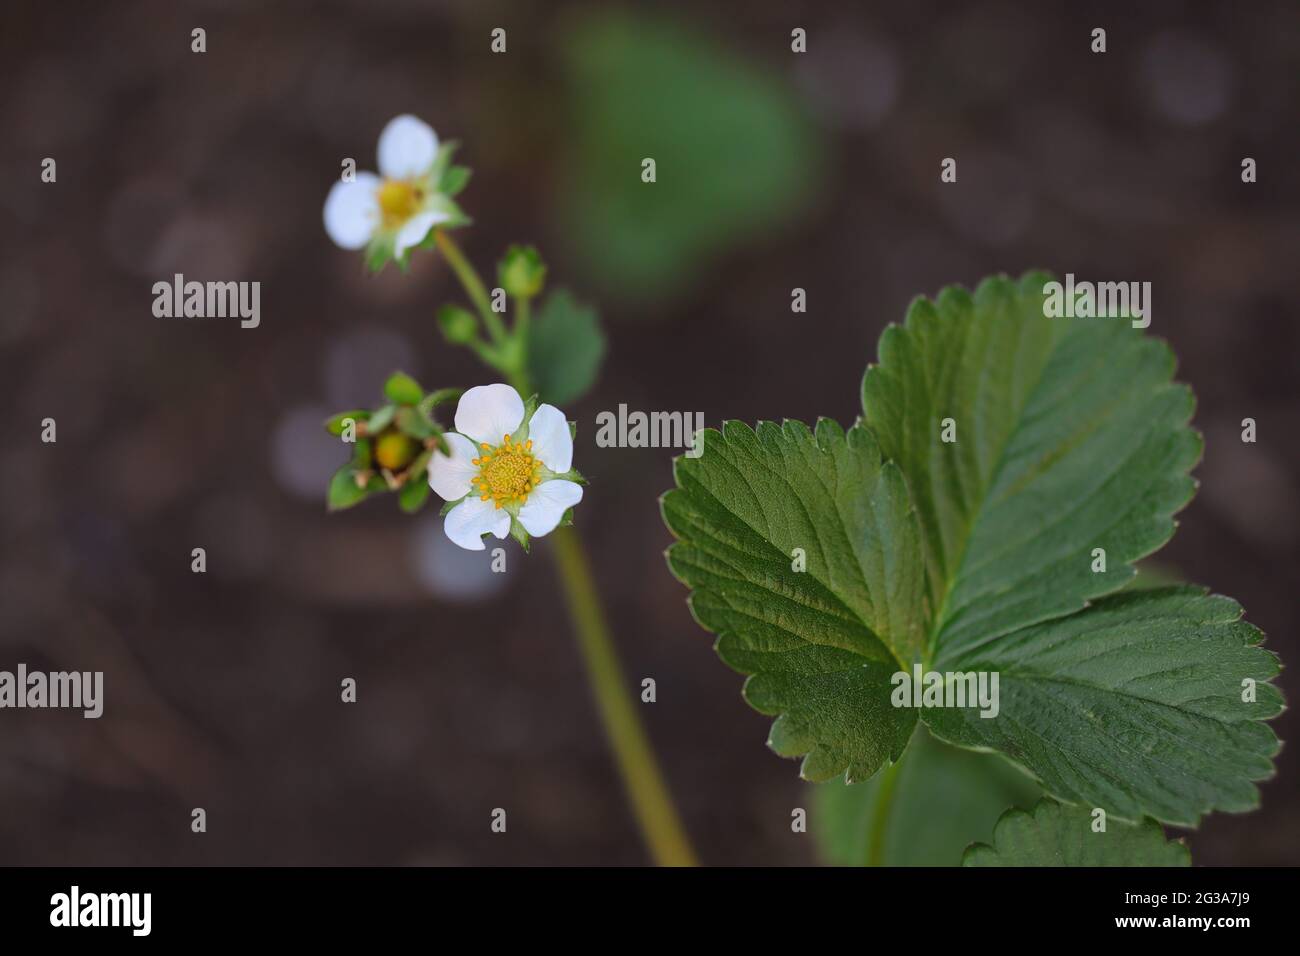 Fragaria x Ananassa in Bloom. White Flower of Garden Strawberry with Green Leaf. Growing Fruit Plant during Spring. Stock Photo